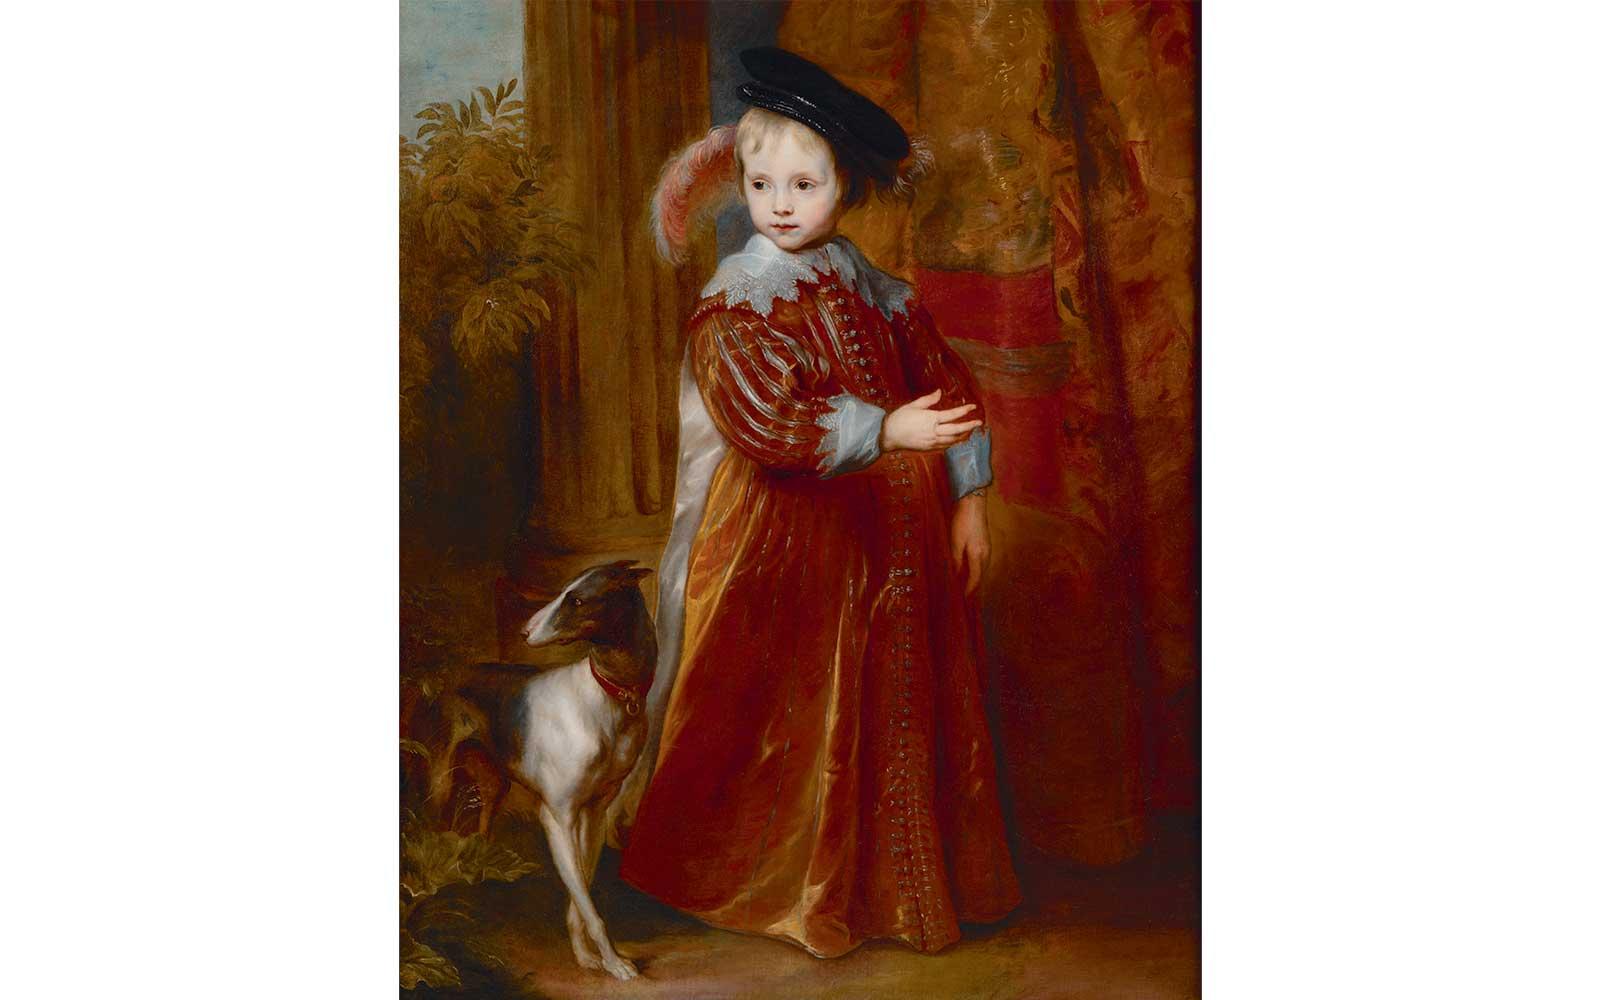 Anthony van Dyck, Portrait of Prince William II of Orange as a Child, about 1631. 